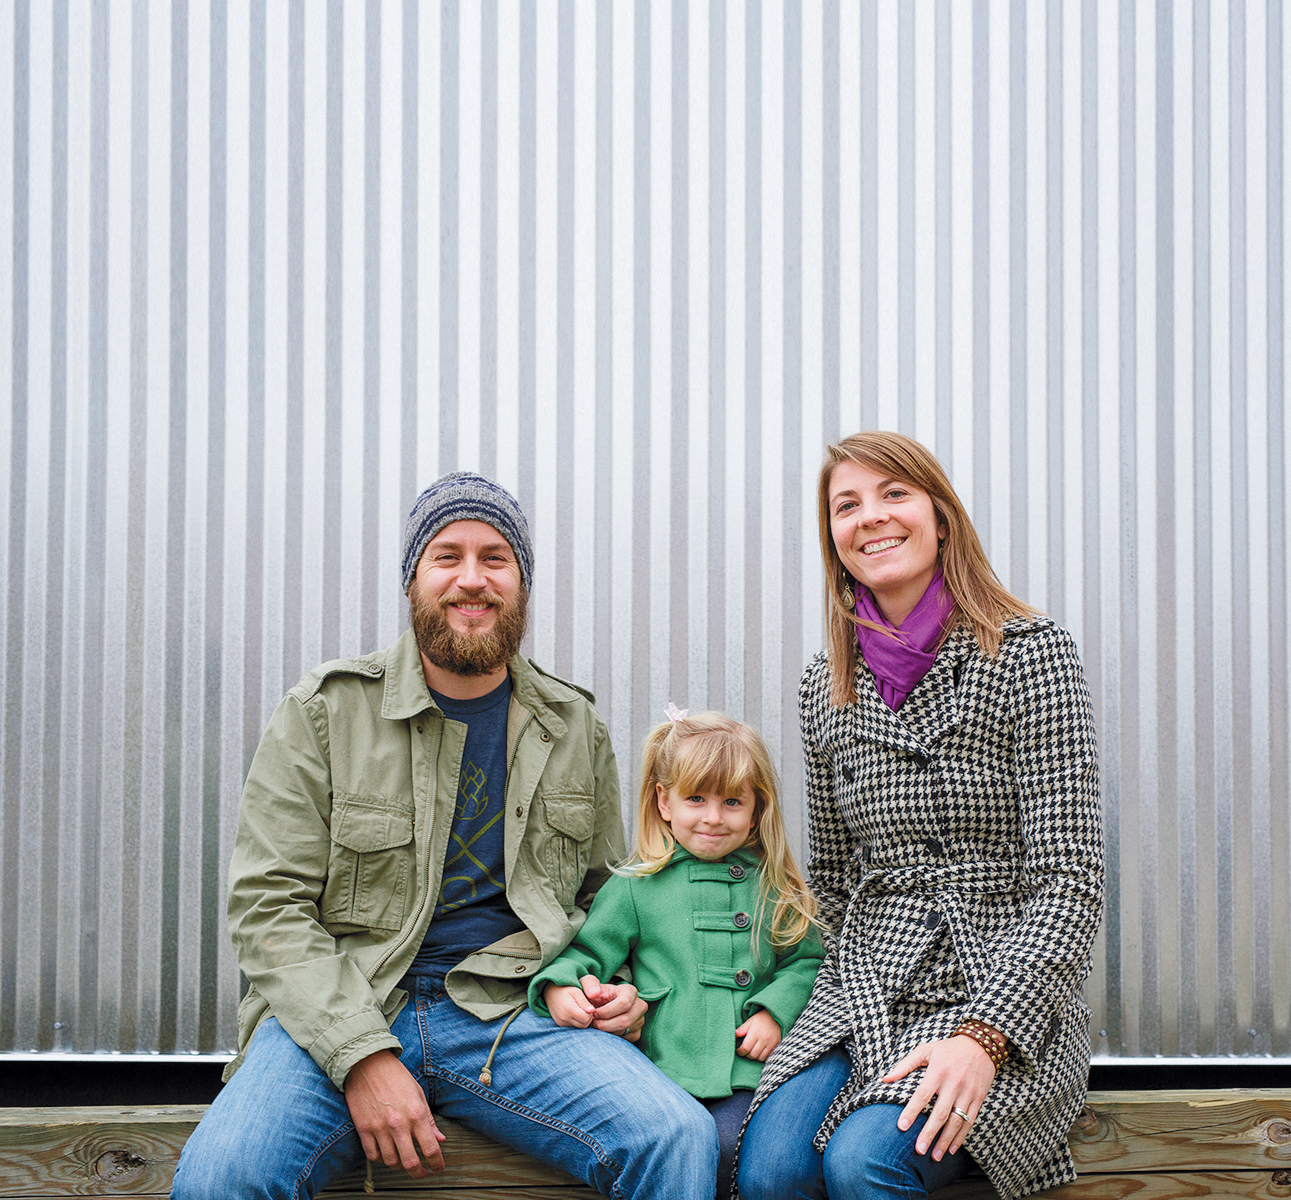 Jesse and Amanda Sensenig, shown with their daughter, Carly, age 3, will open Goshen Brewing Company in 2015